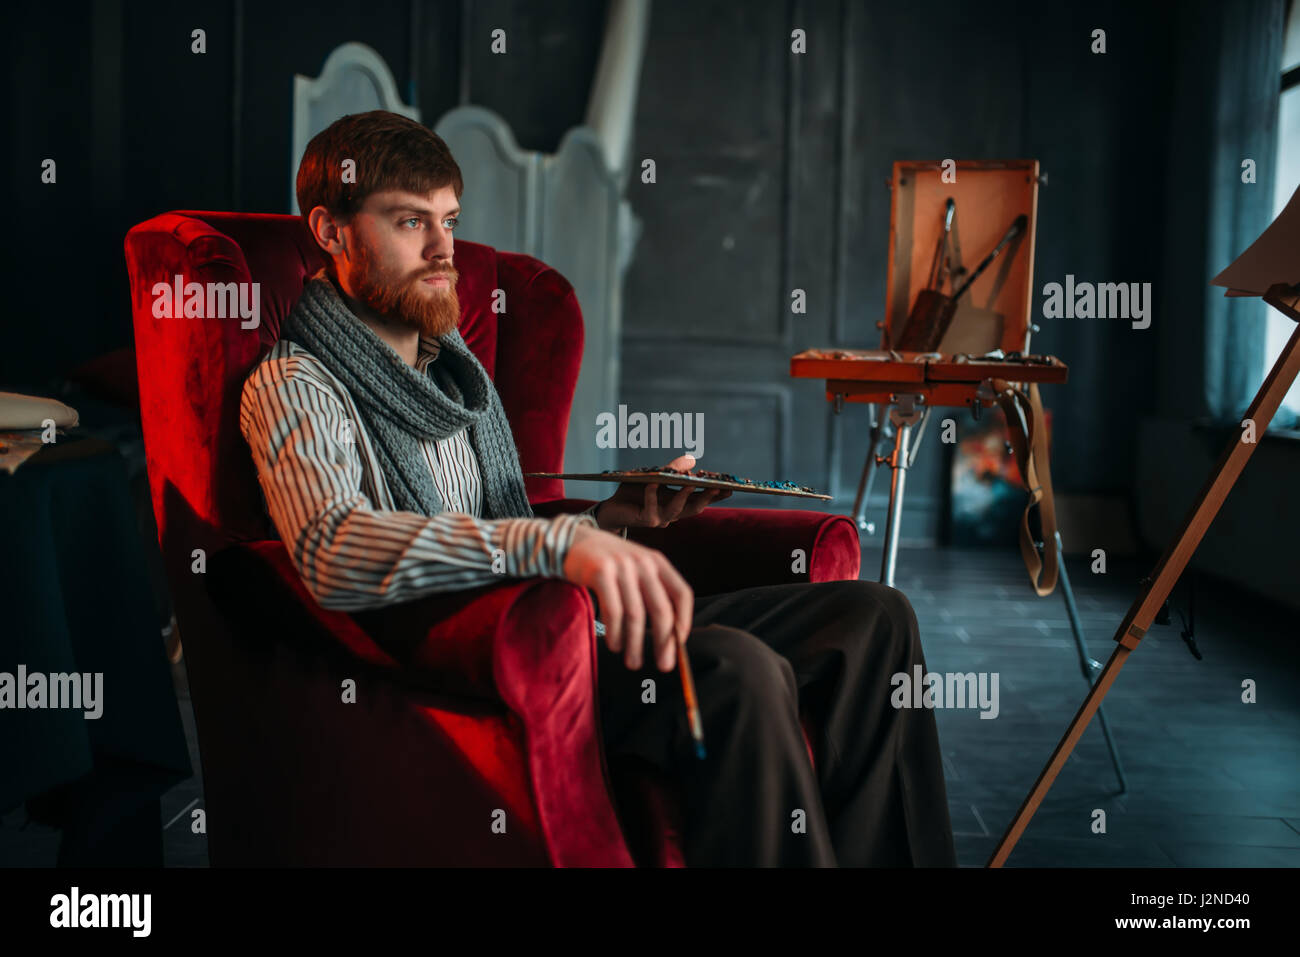 Painter with palette and brush in hand sitting on a chair, art studio on background Stock Photo